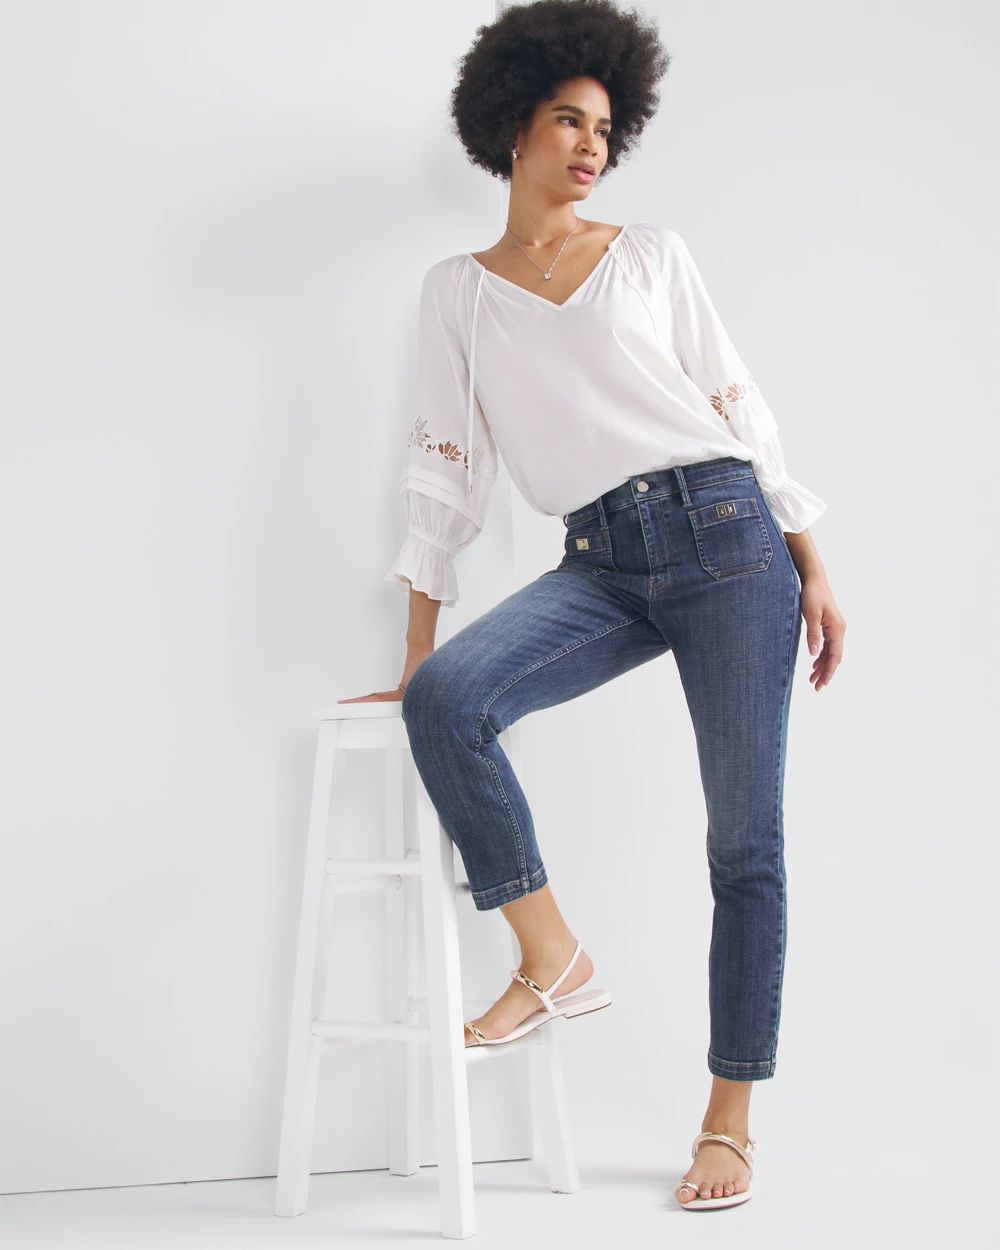 High-Rise Everyday Soft Turnlock Slim Crop Jeans click to view larger image.